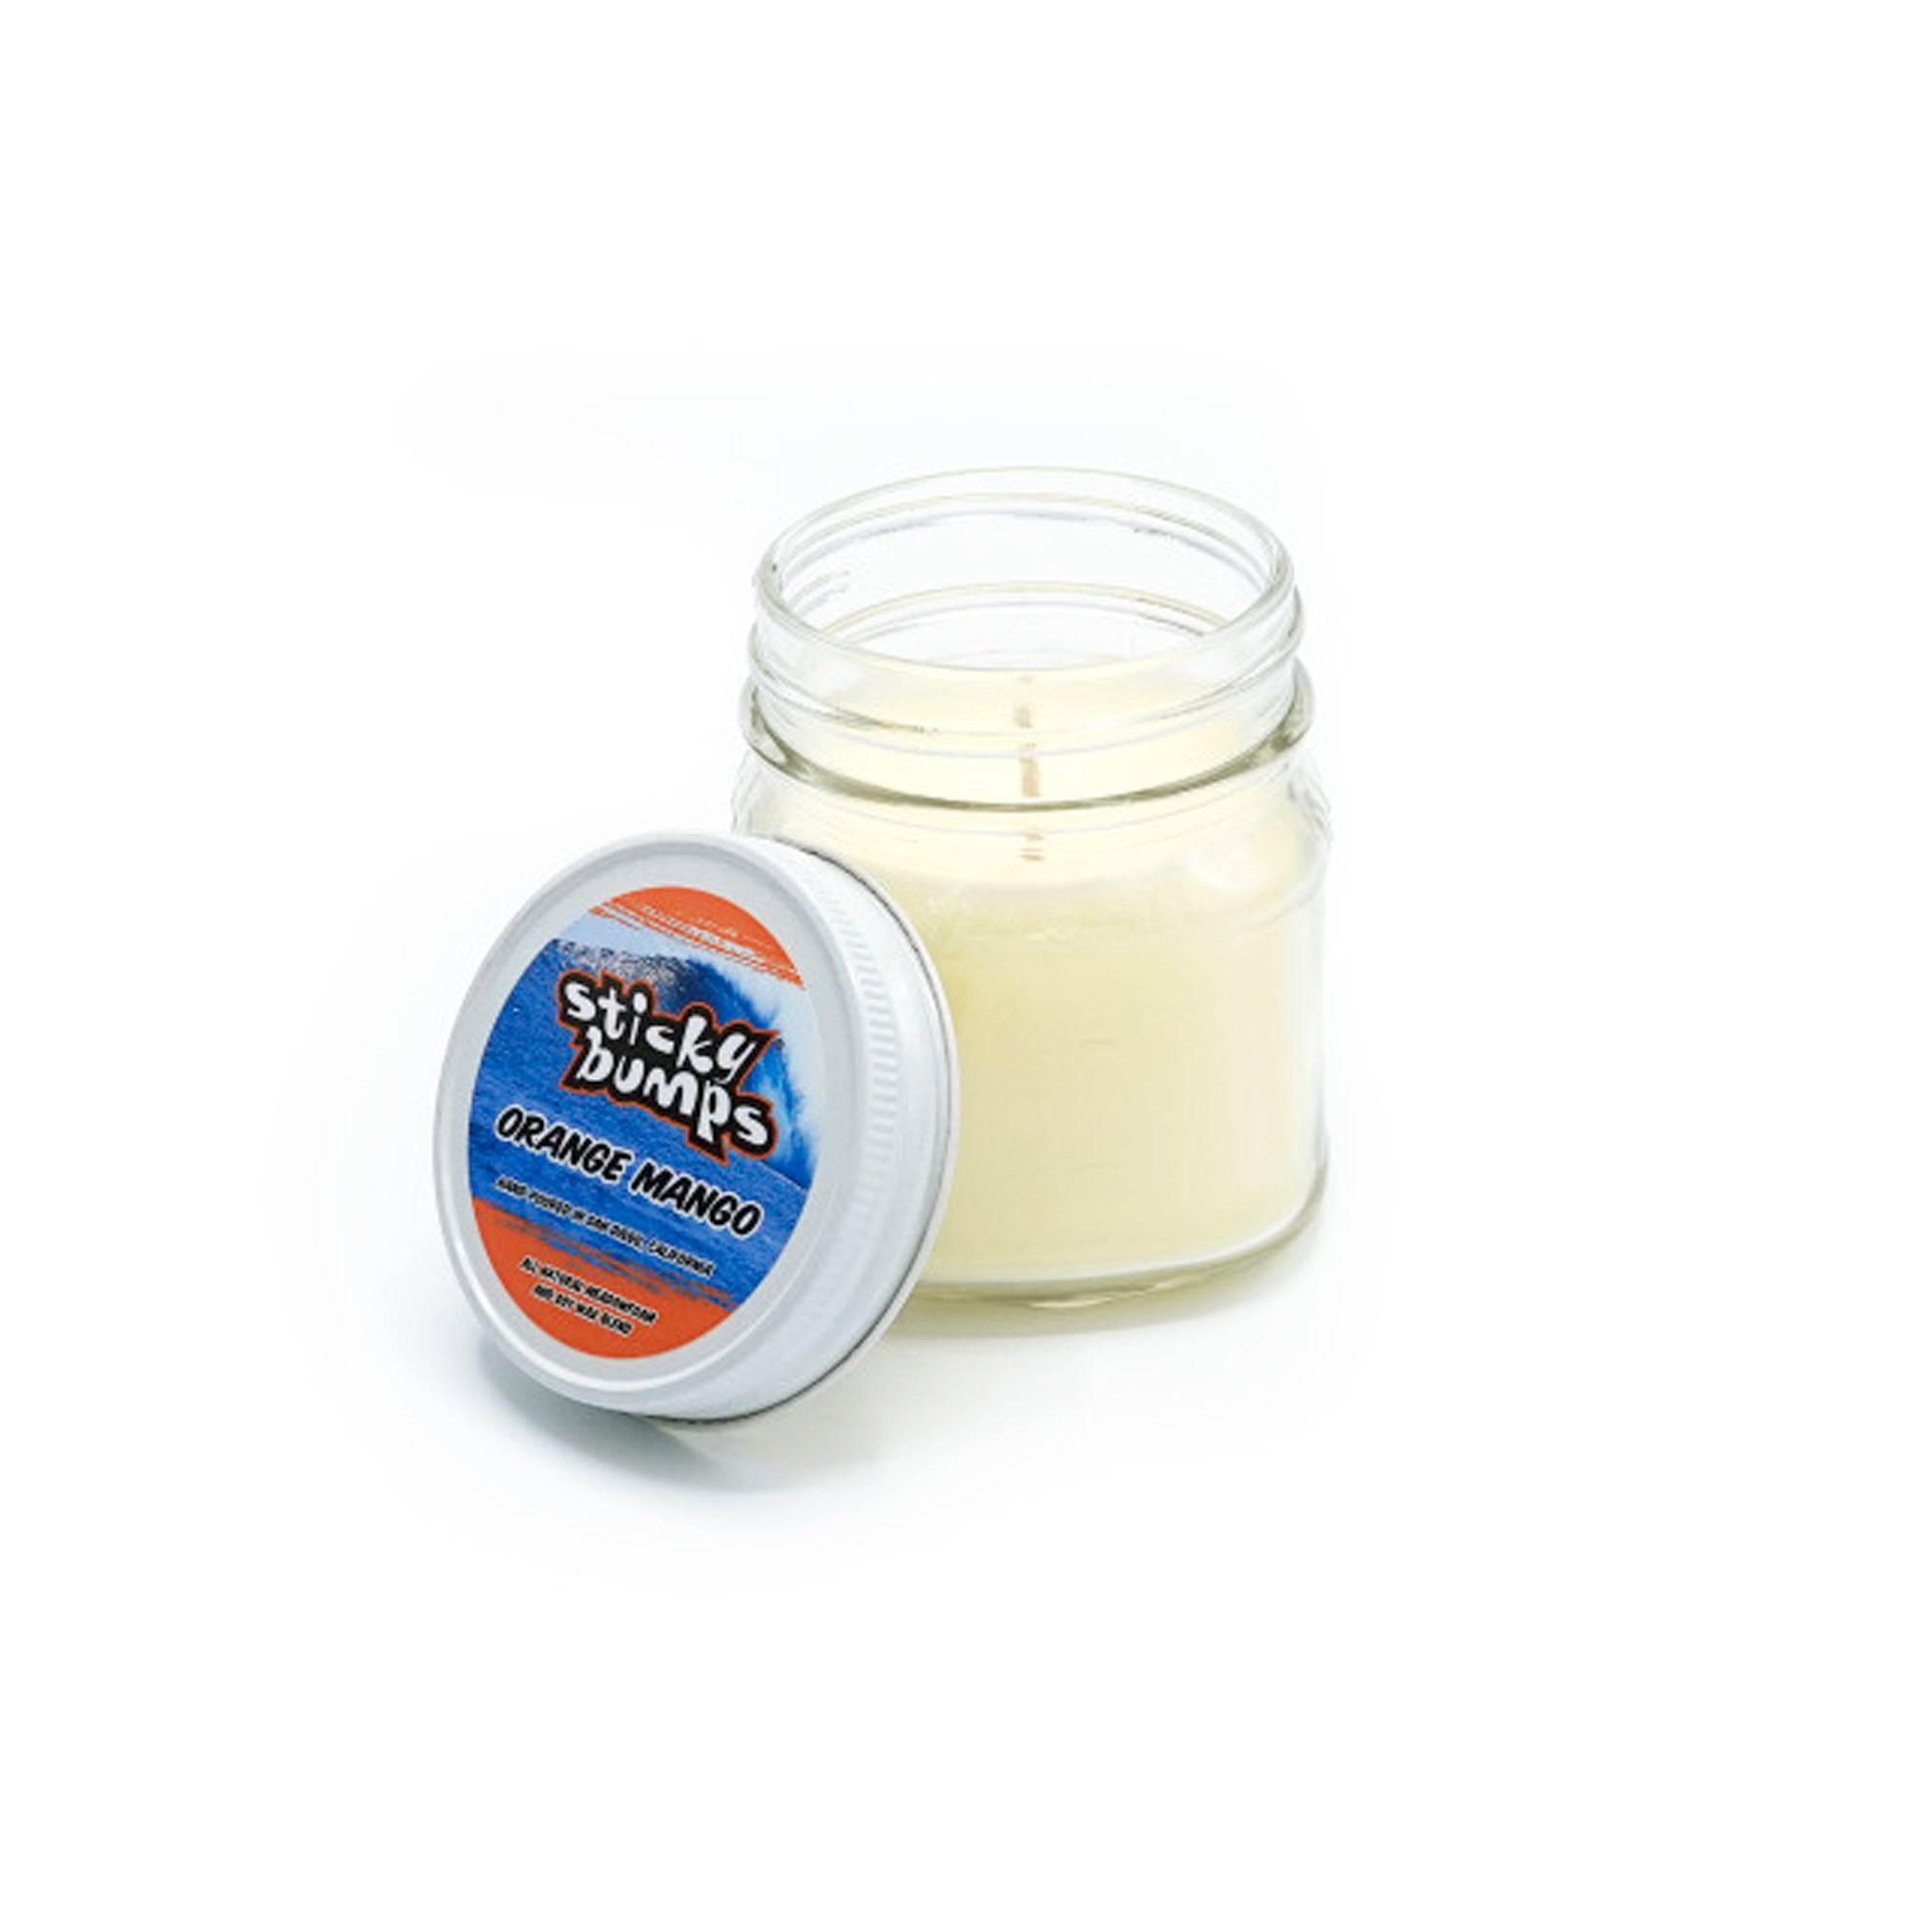 Sticky Bumps 7oz Candle